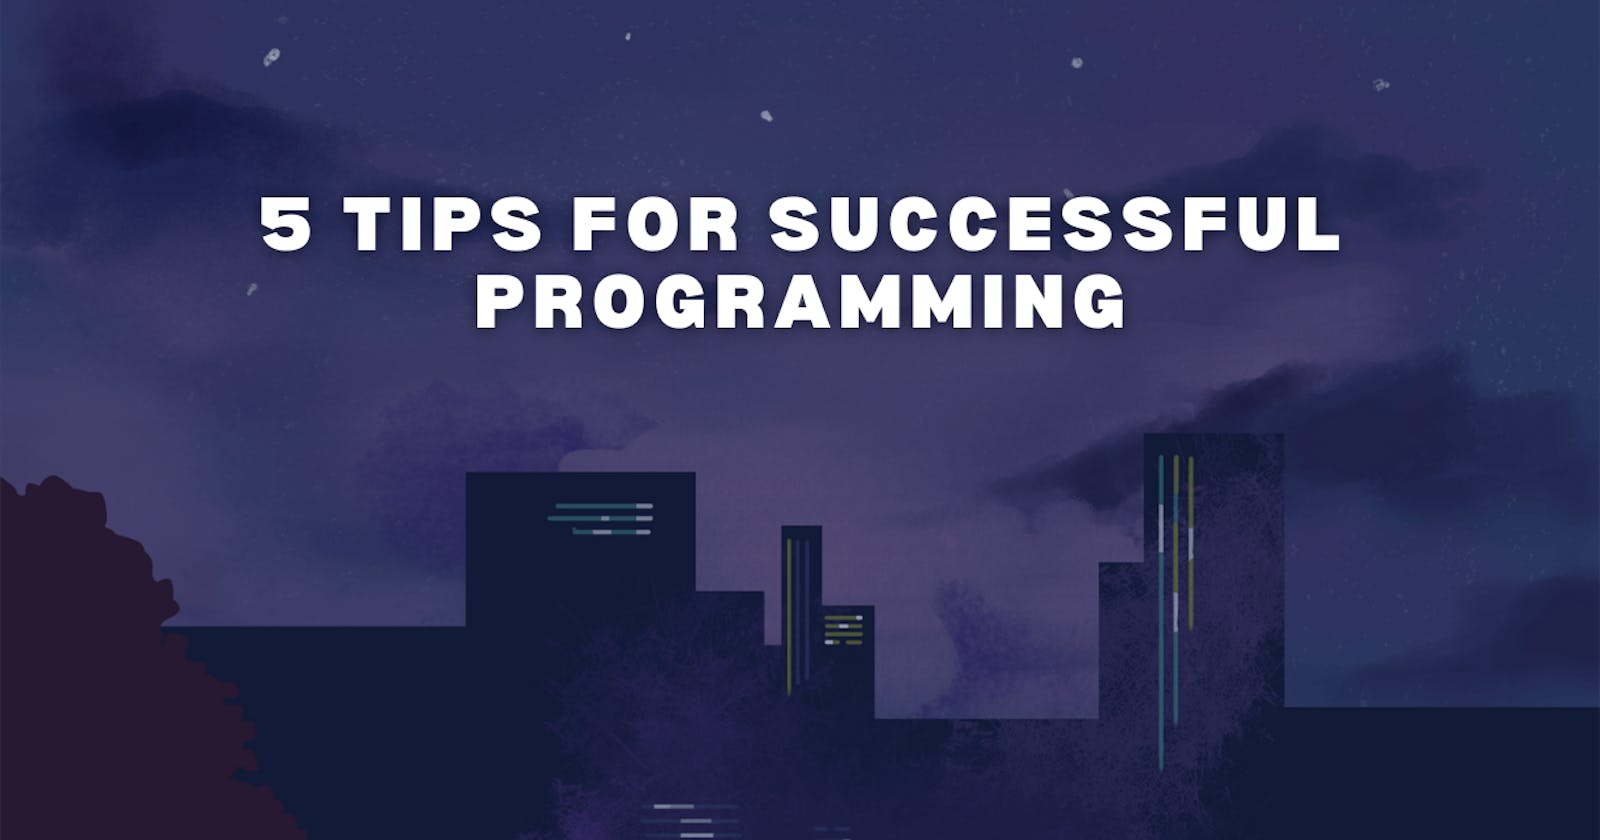 5 Tips for Successful Programming